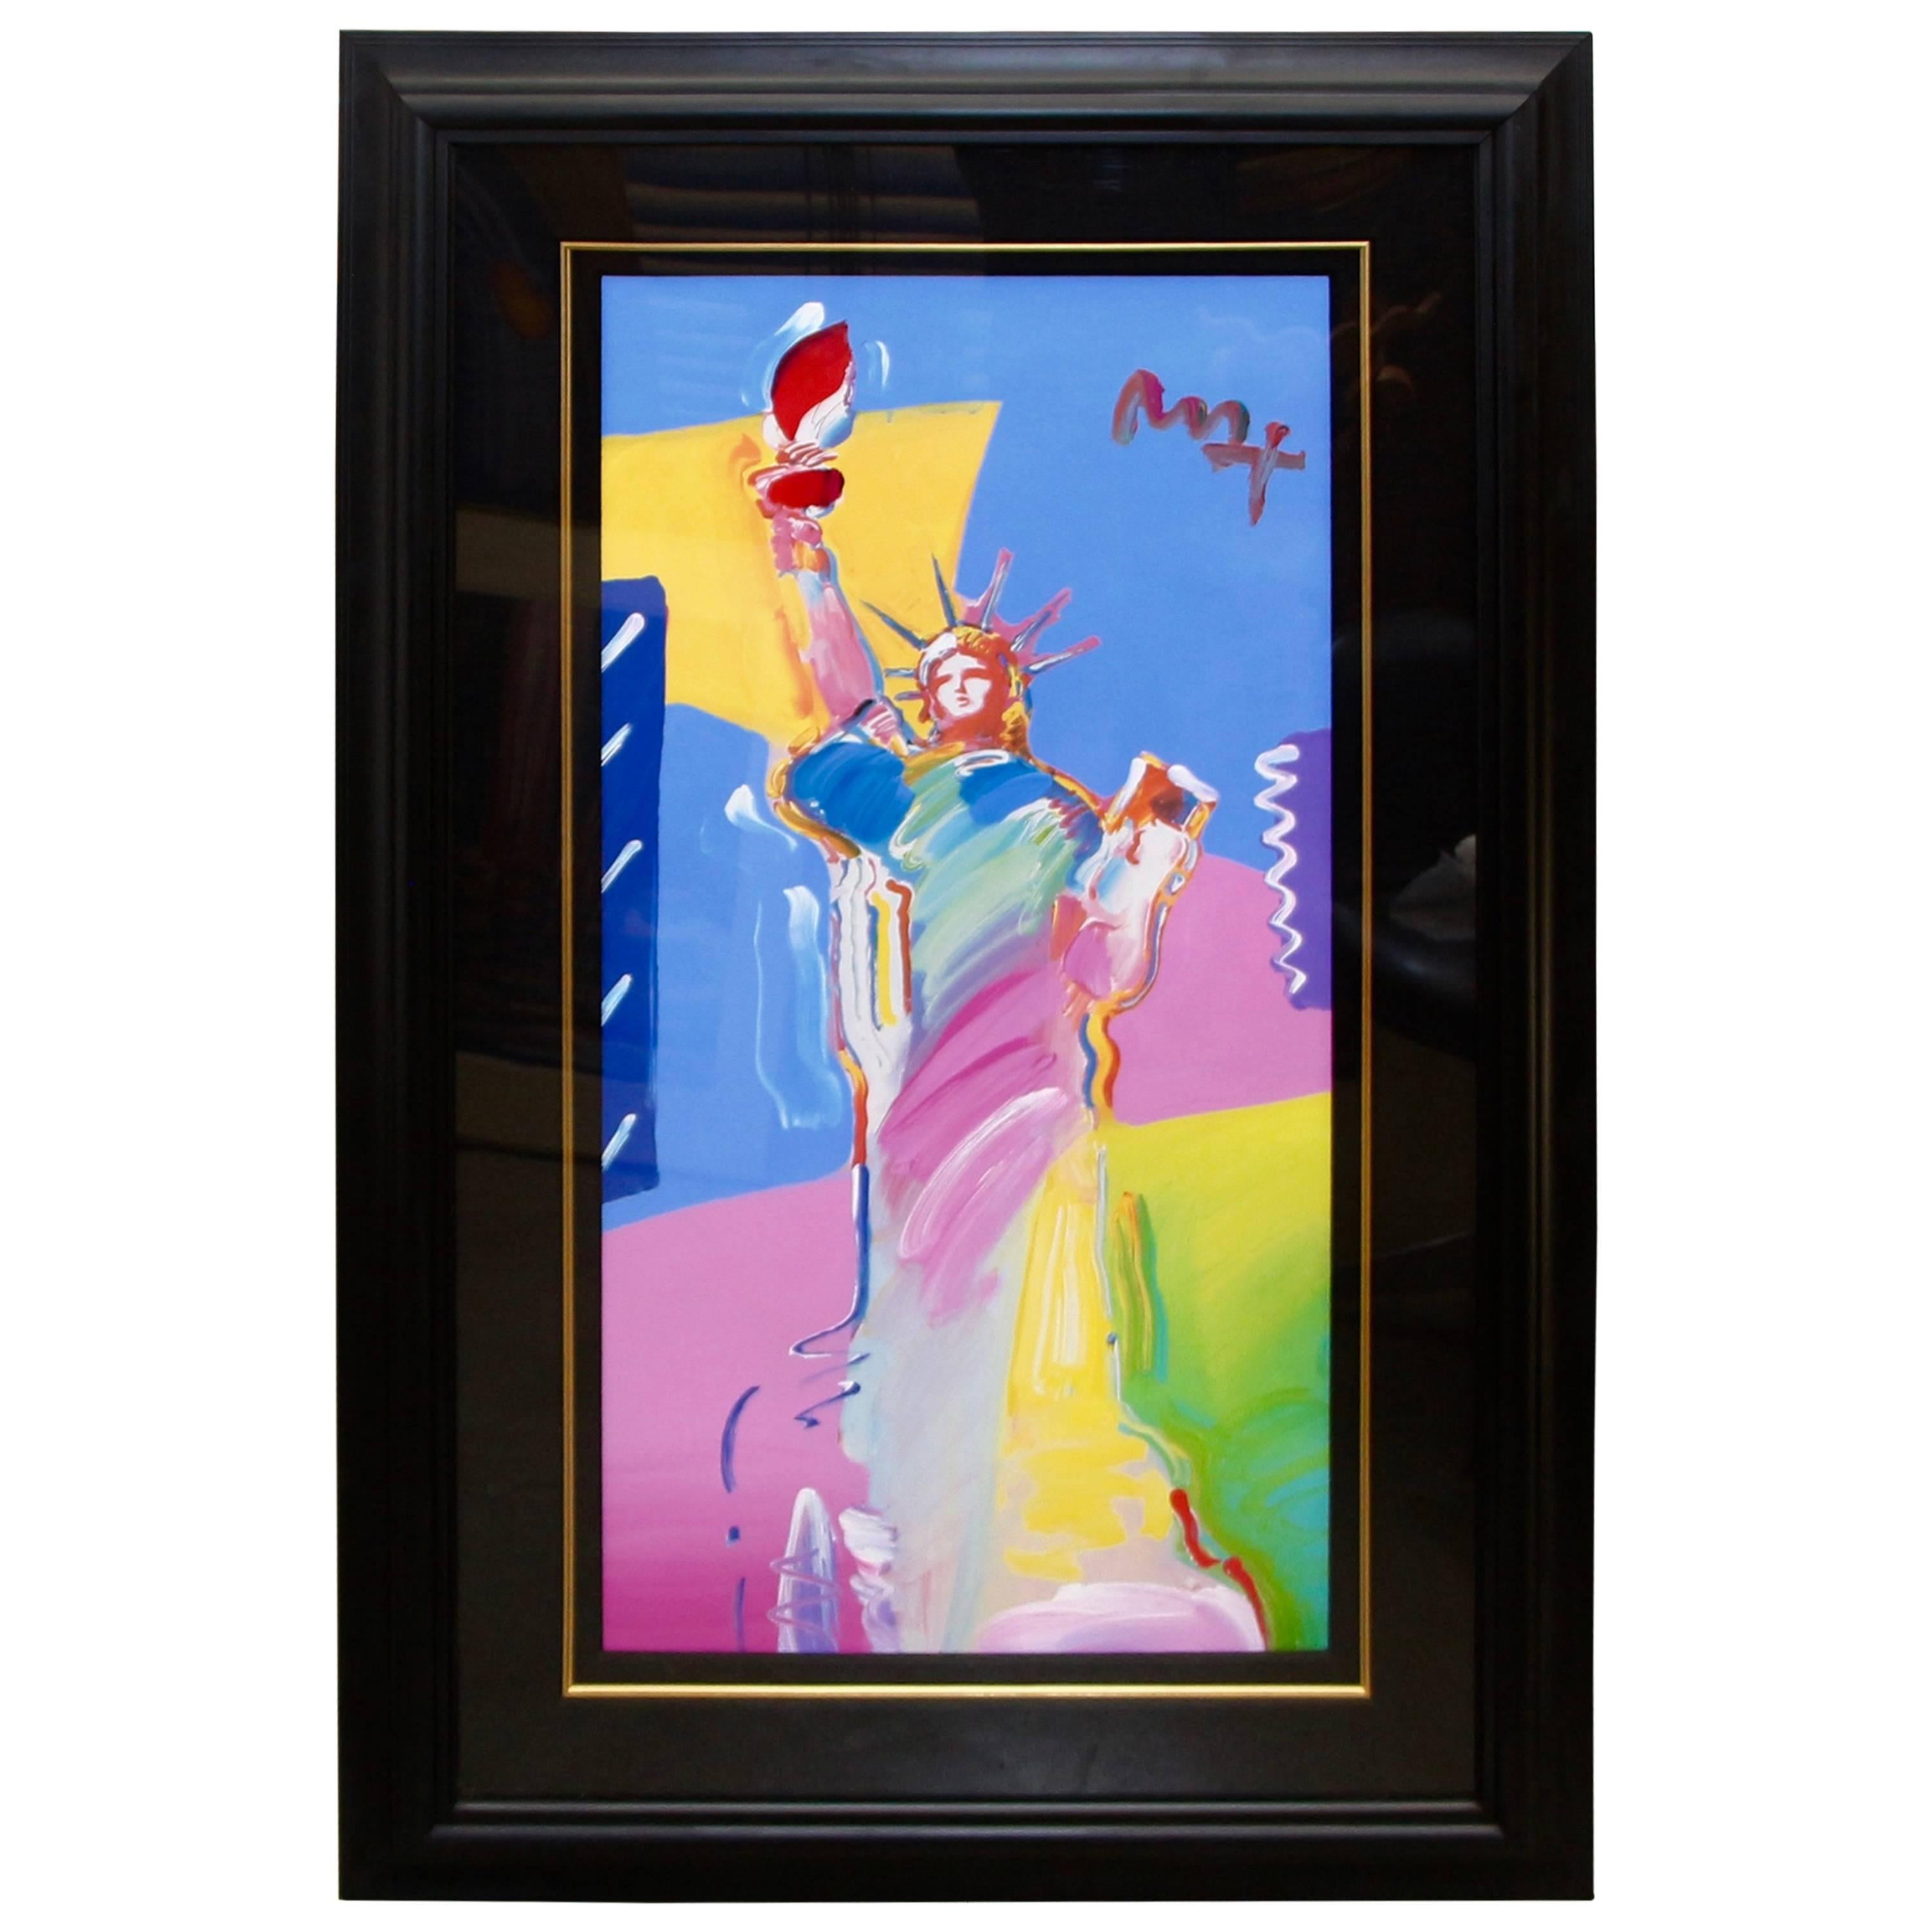 Peter Max "Statue of Liberty", 2001